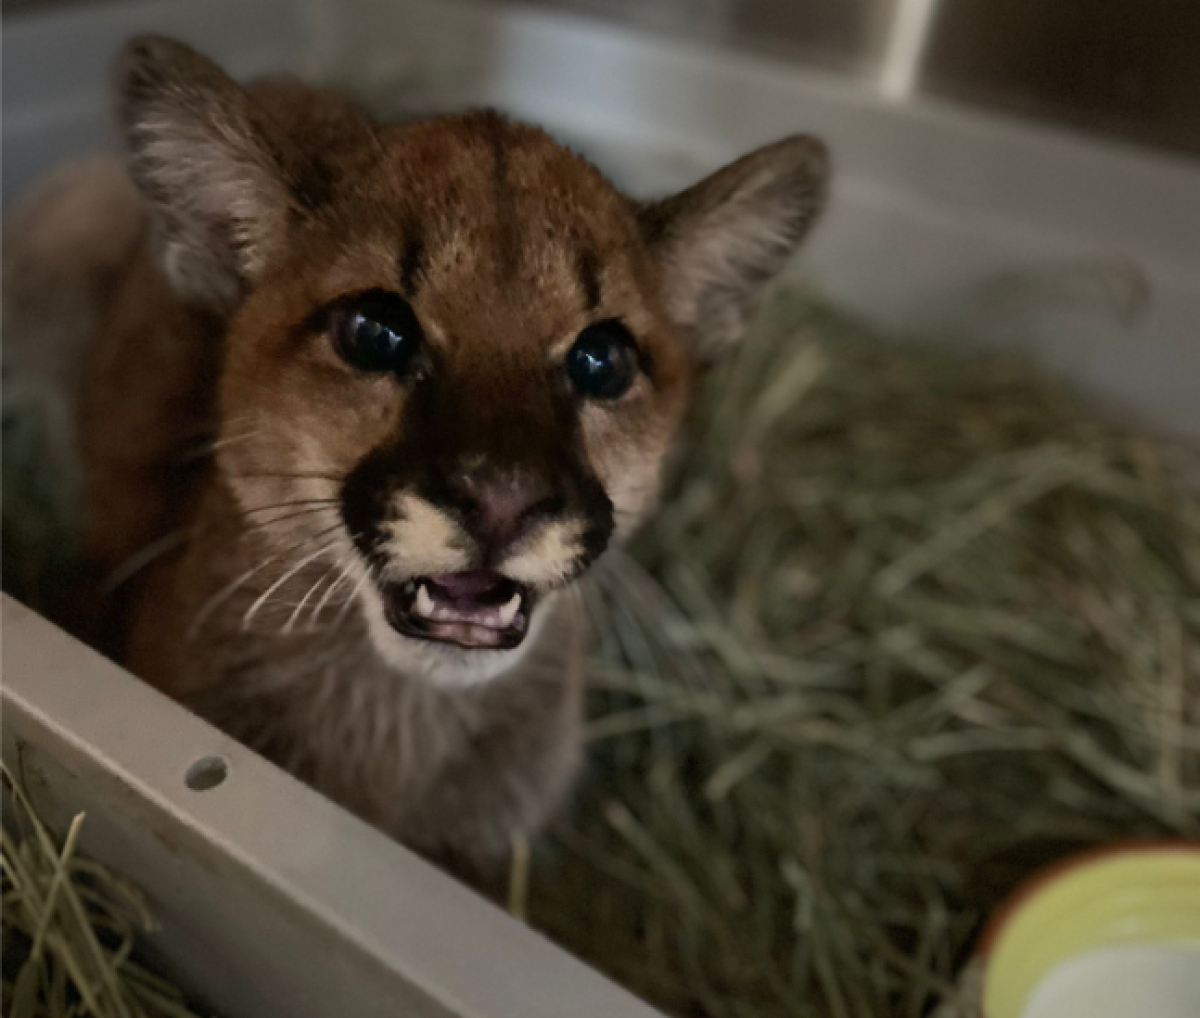 A close-up photo of a mountain lion cub in an enclosure.